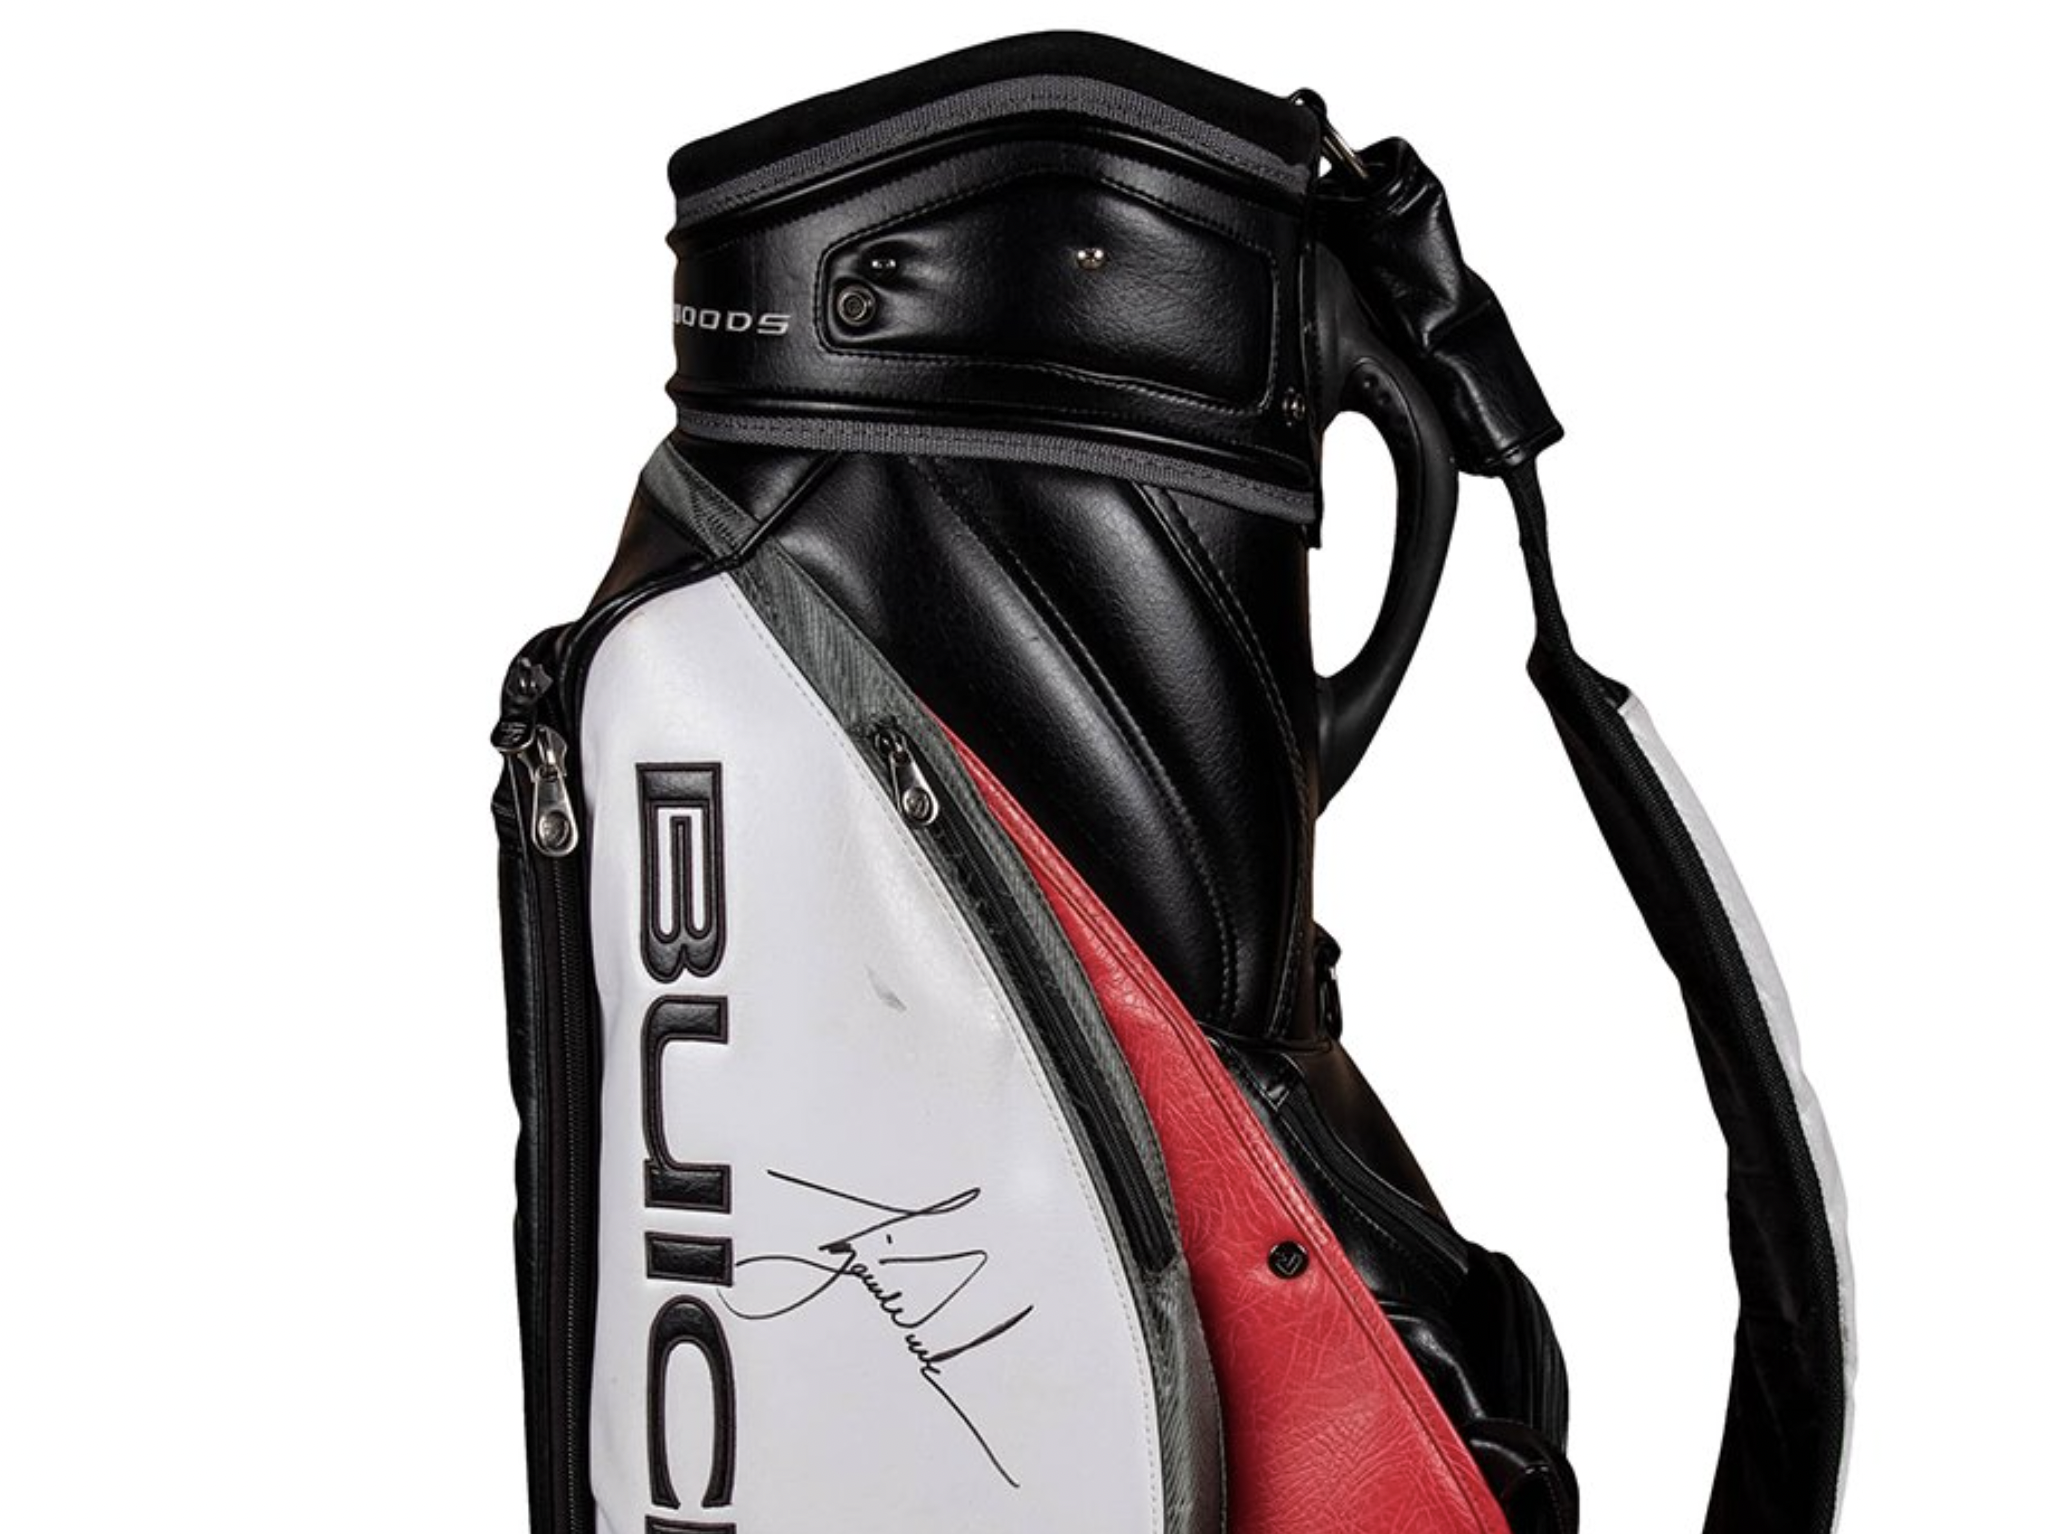 Woods tournament-used and signed Nike golf bag sells for record price GolfWRX